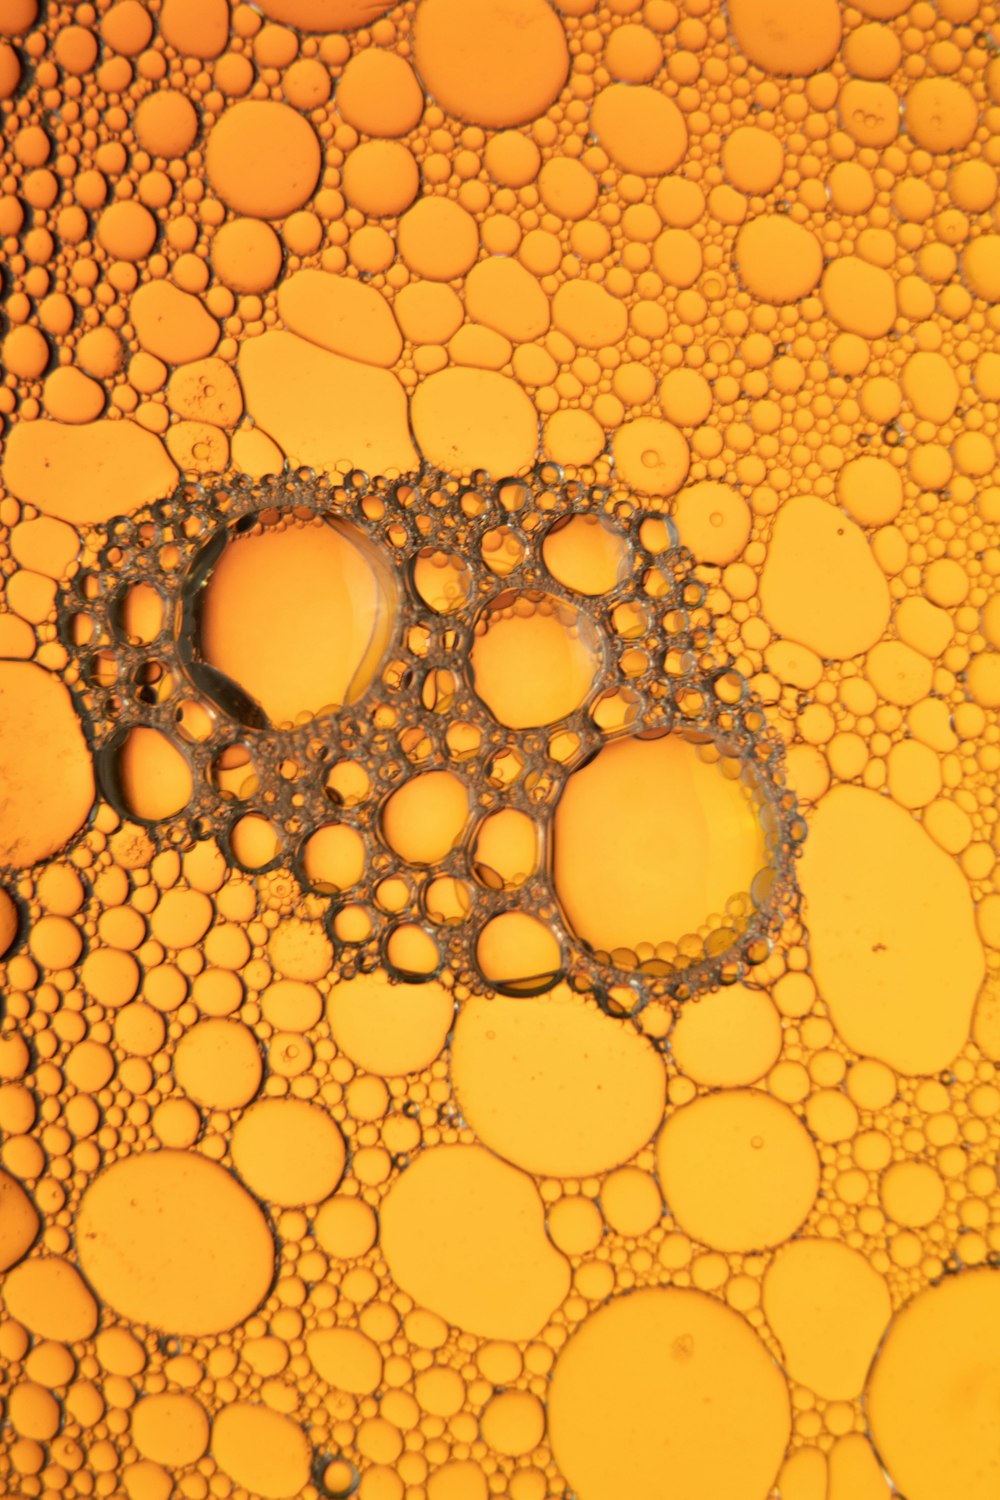 water droplets on yellow surface